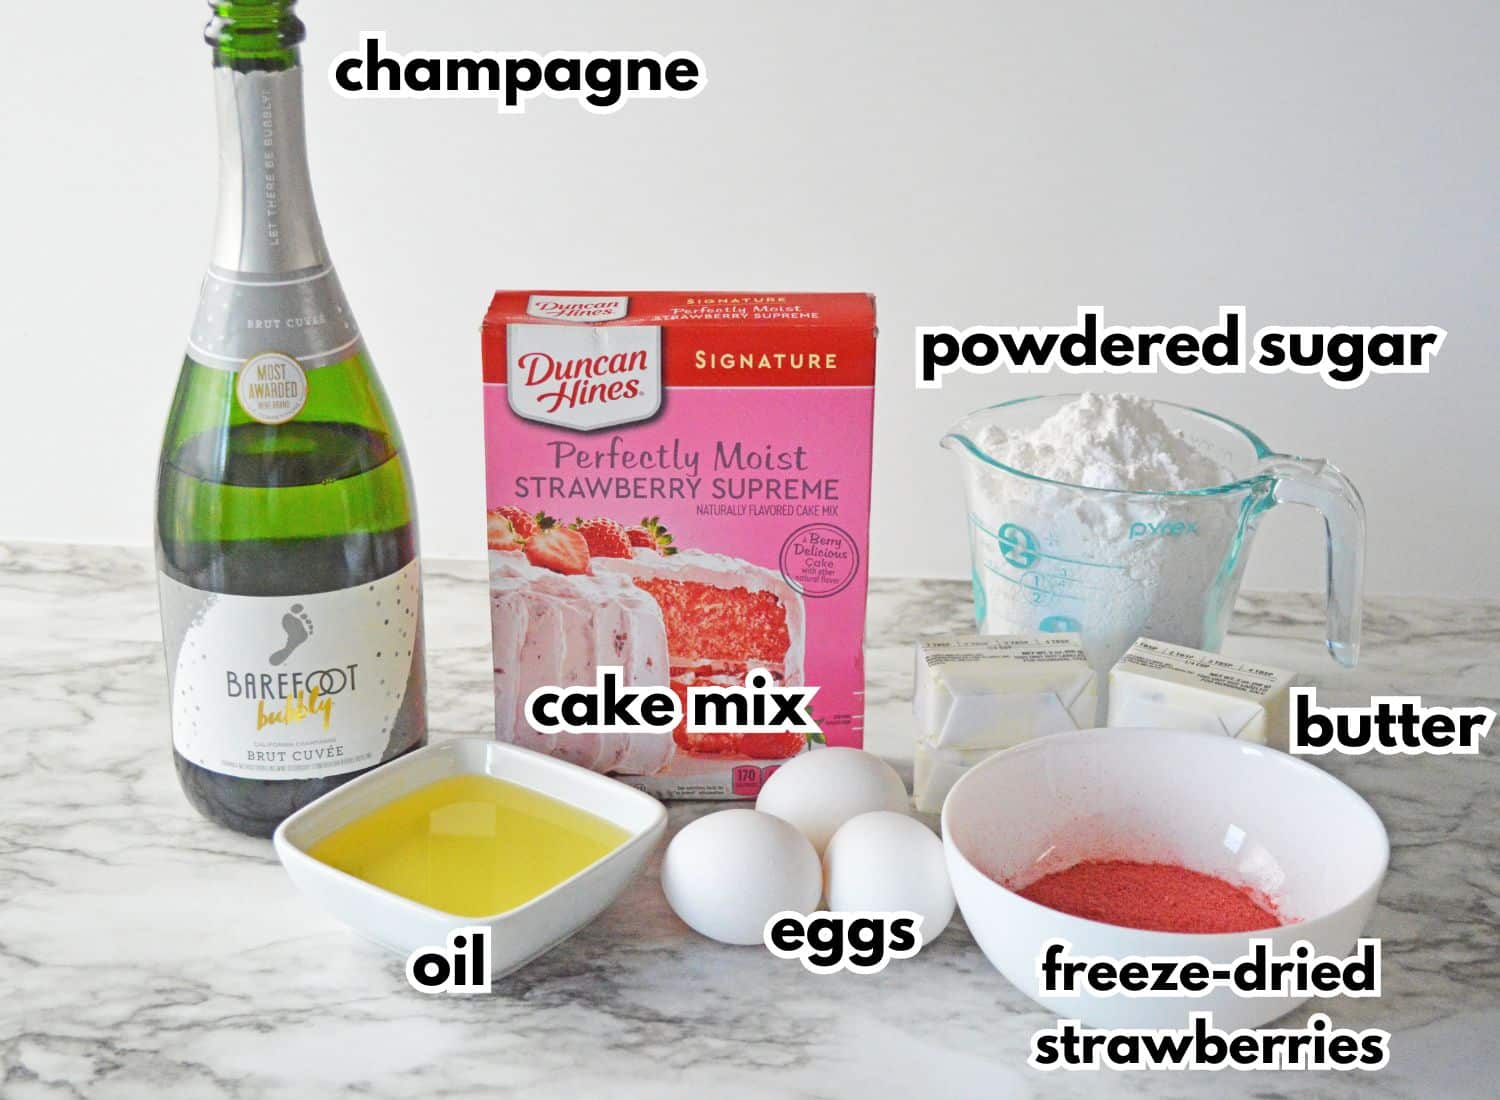 champagne, powdered sugar, oil, cake mix, eggs, butter, and freeze-dried strawberries on a backdrop.